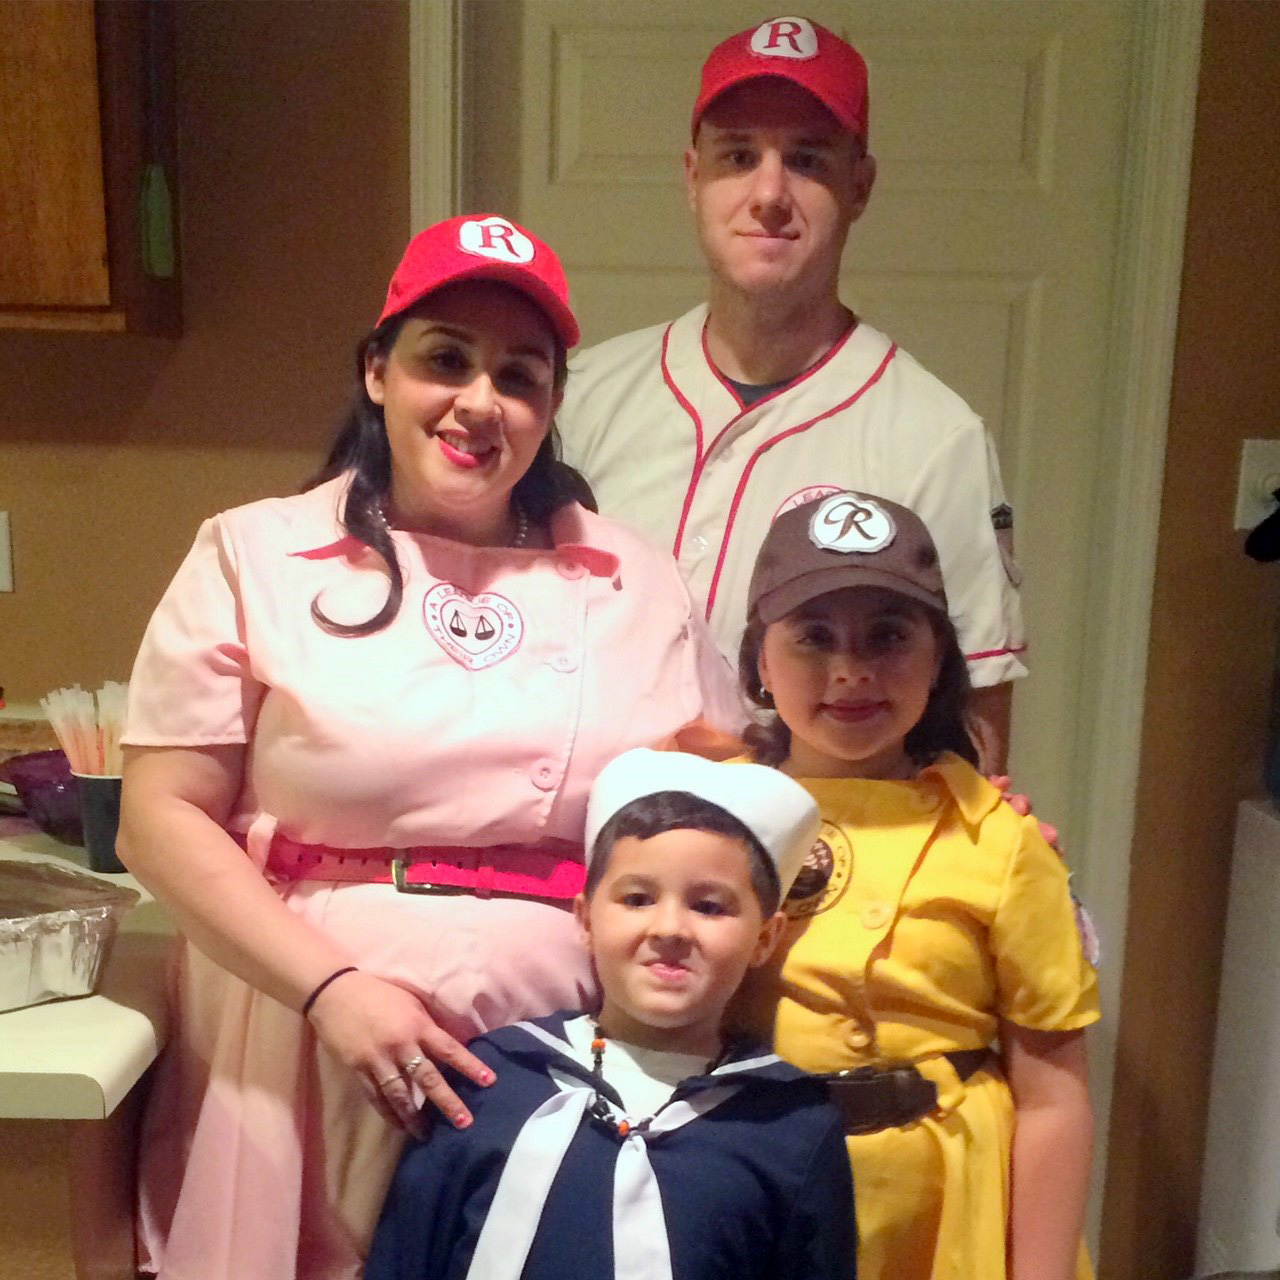 PHOTO: The Basteen family were "A League of Their Own" characters for Halloween in 2015.